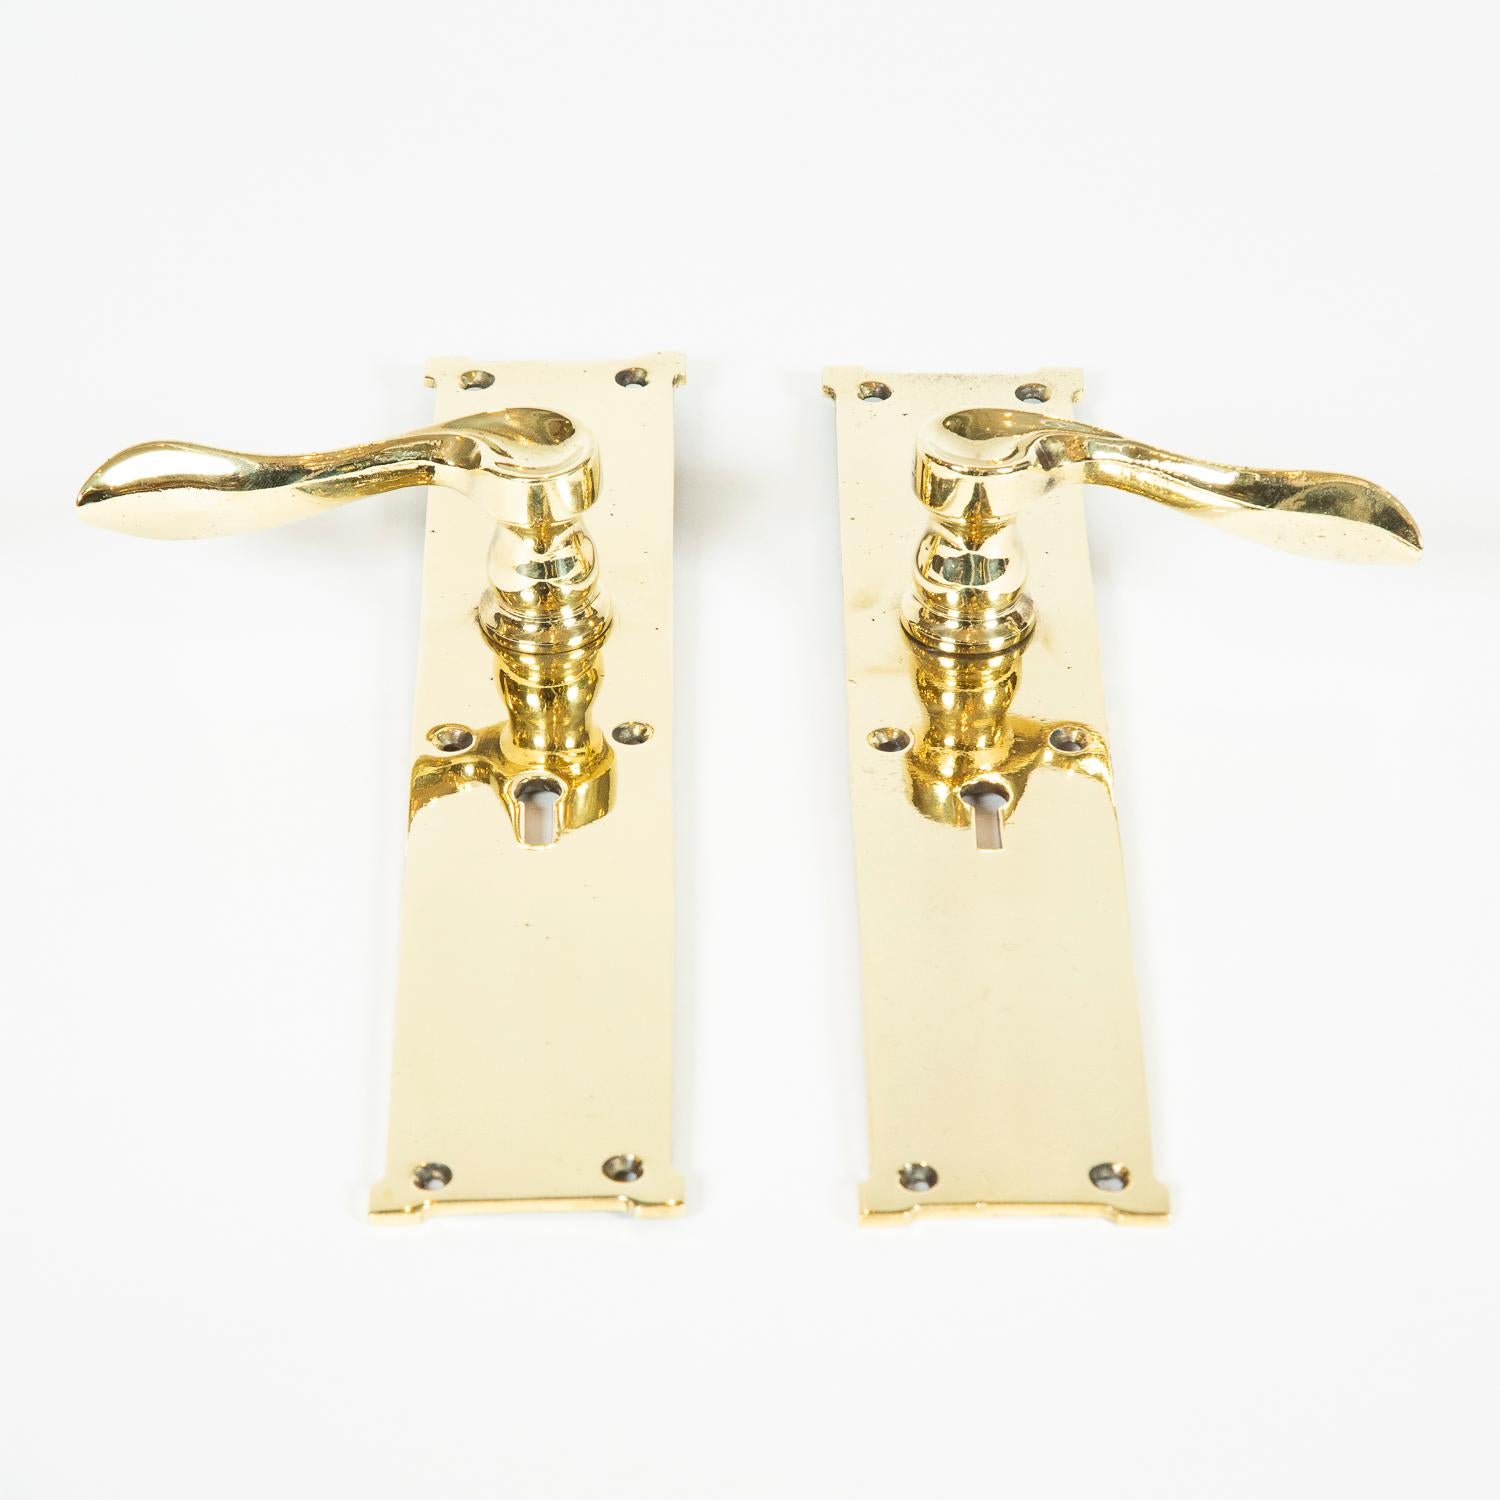 A pair of Edwardian brass door handles by William Tonks & Sons of Birmingham. 

W T & S sun mark to back. 

William Tonks founded the firm in 1789. They won gold medals at the 1851 and 1862 exhibitions in London, and in 1855 at Paris.

